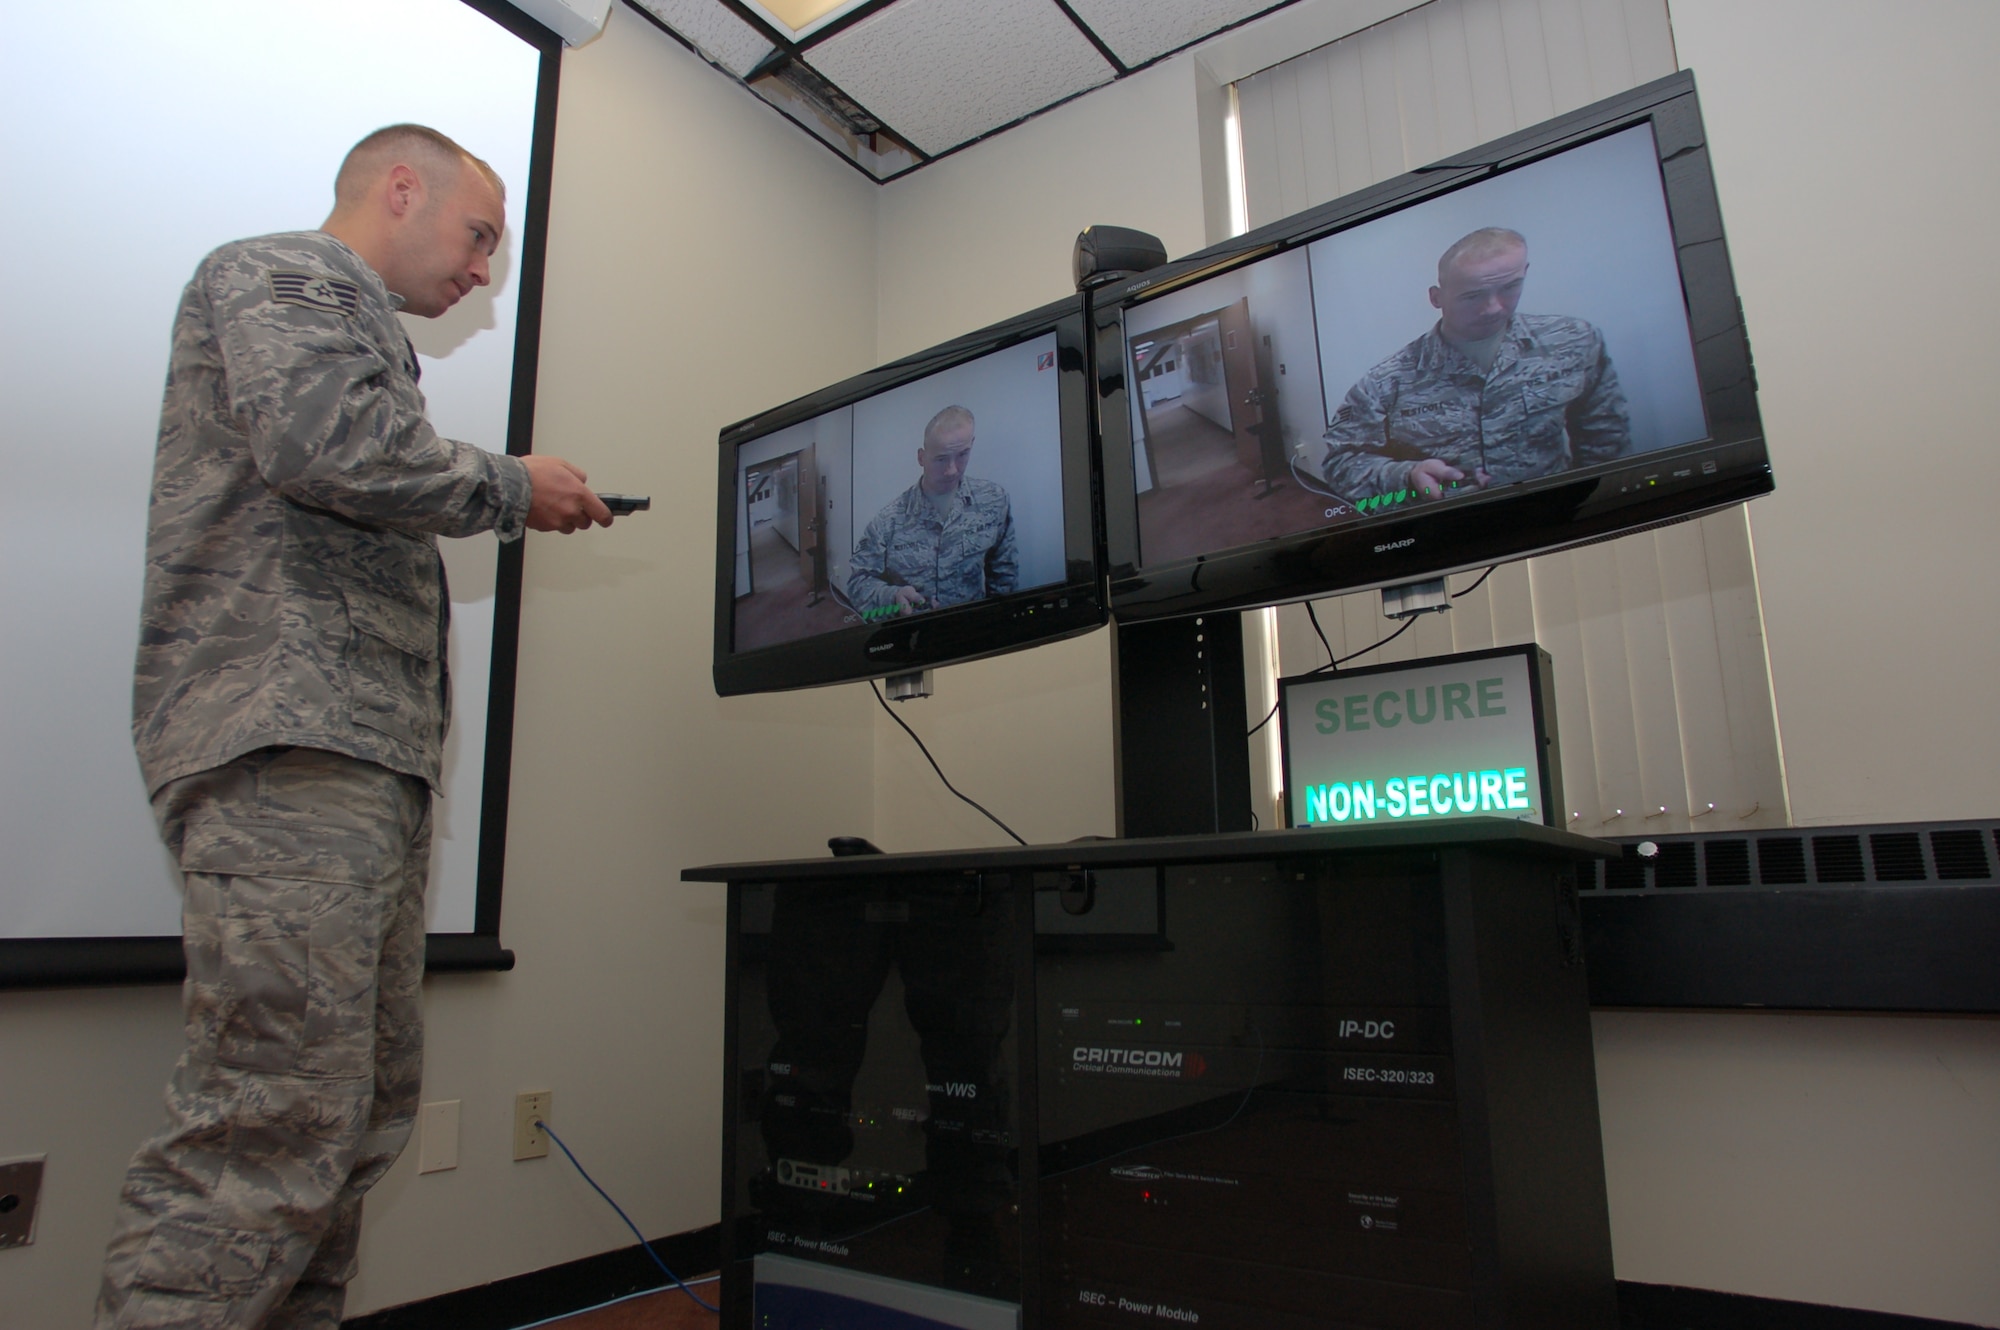 Staff Sgt. Paul Westcott, knowledge management operations apprentice, 103rd Air and Space Operations Group, configures the newly acquired video teleconferencing equipment suite during a routine operational check, October 1, 2009.  The new VTC capability will enable members of the Connecticut Air National Guard to communicate directly with supported units across the globe.  (U.S. Air Force photo by Capt Bryon M. Turner)
